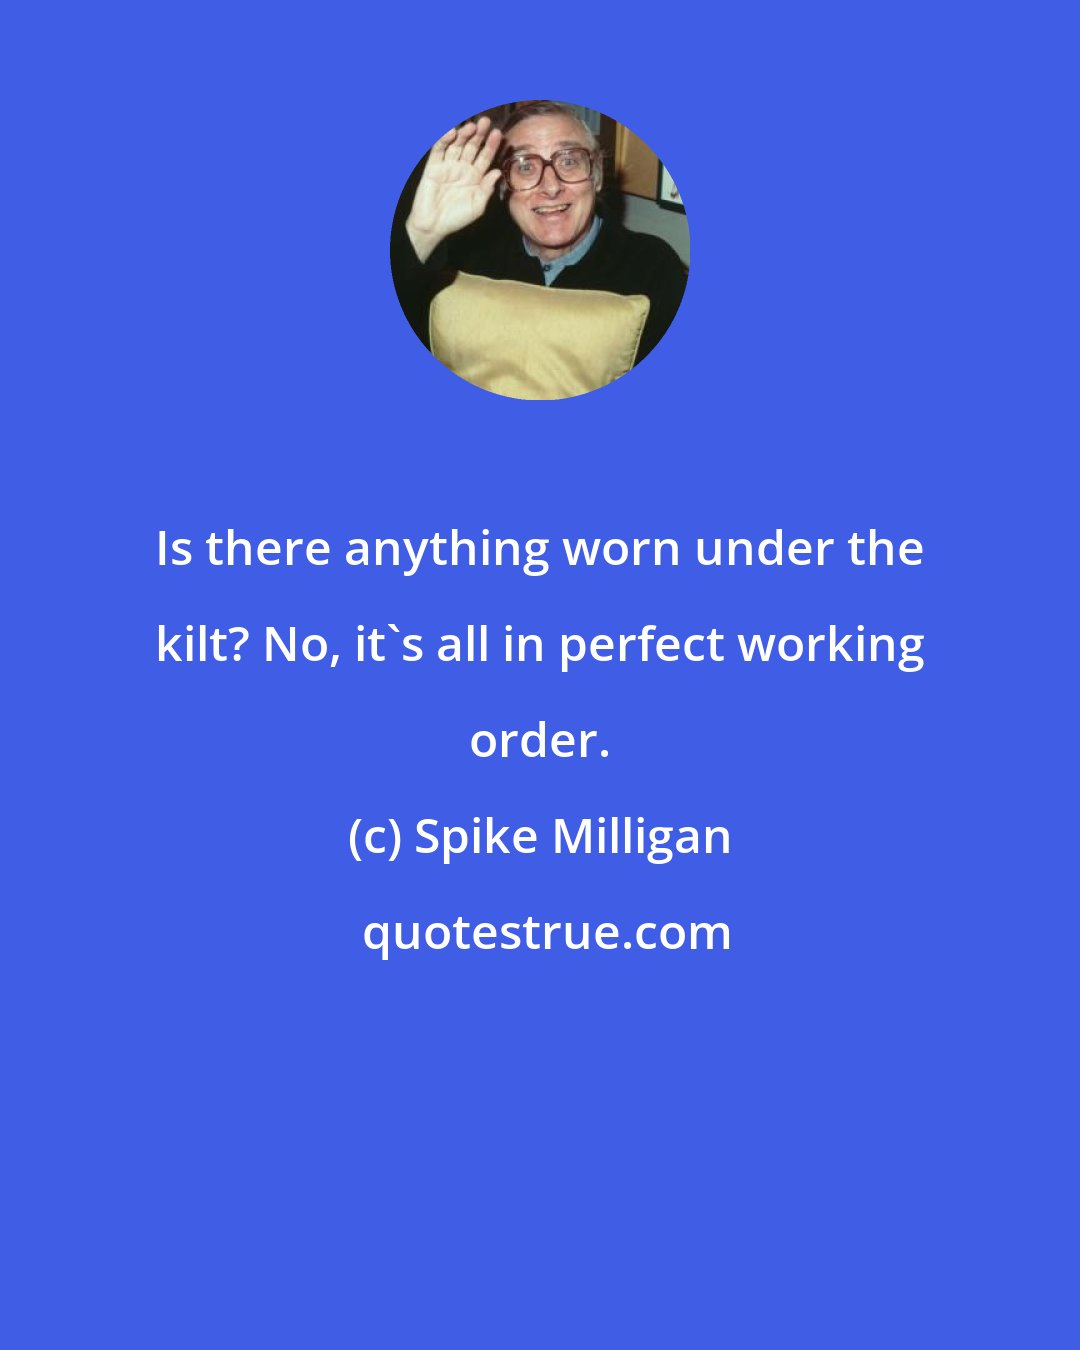 Spike Milligan: Is there anything worn under the kilt? No, it's all in perfect working order.